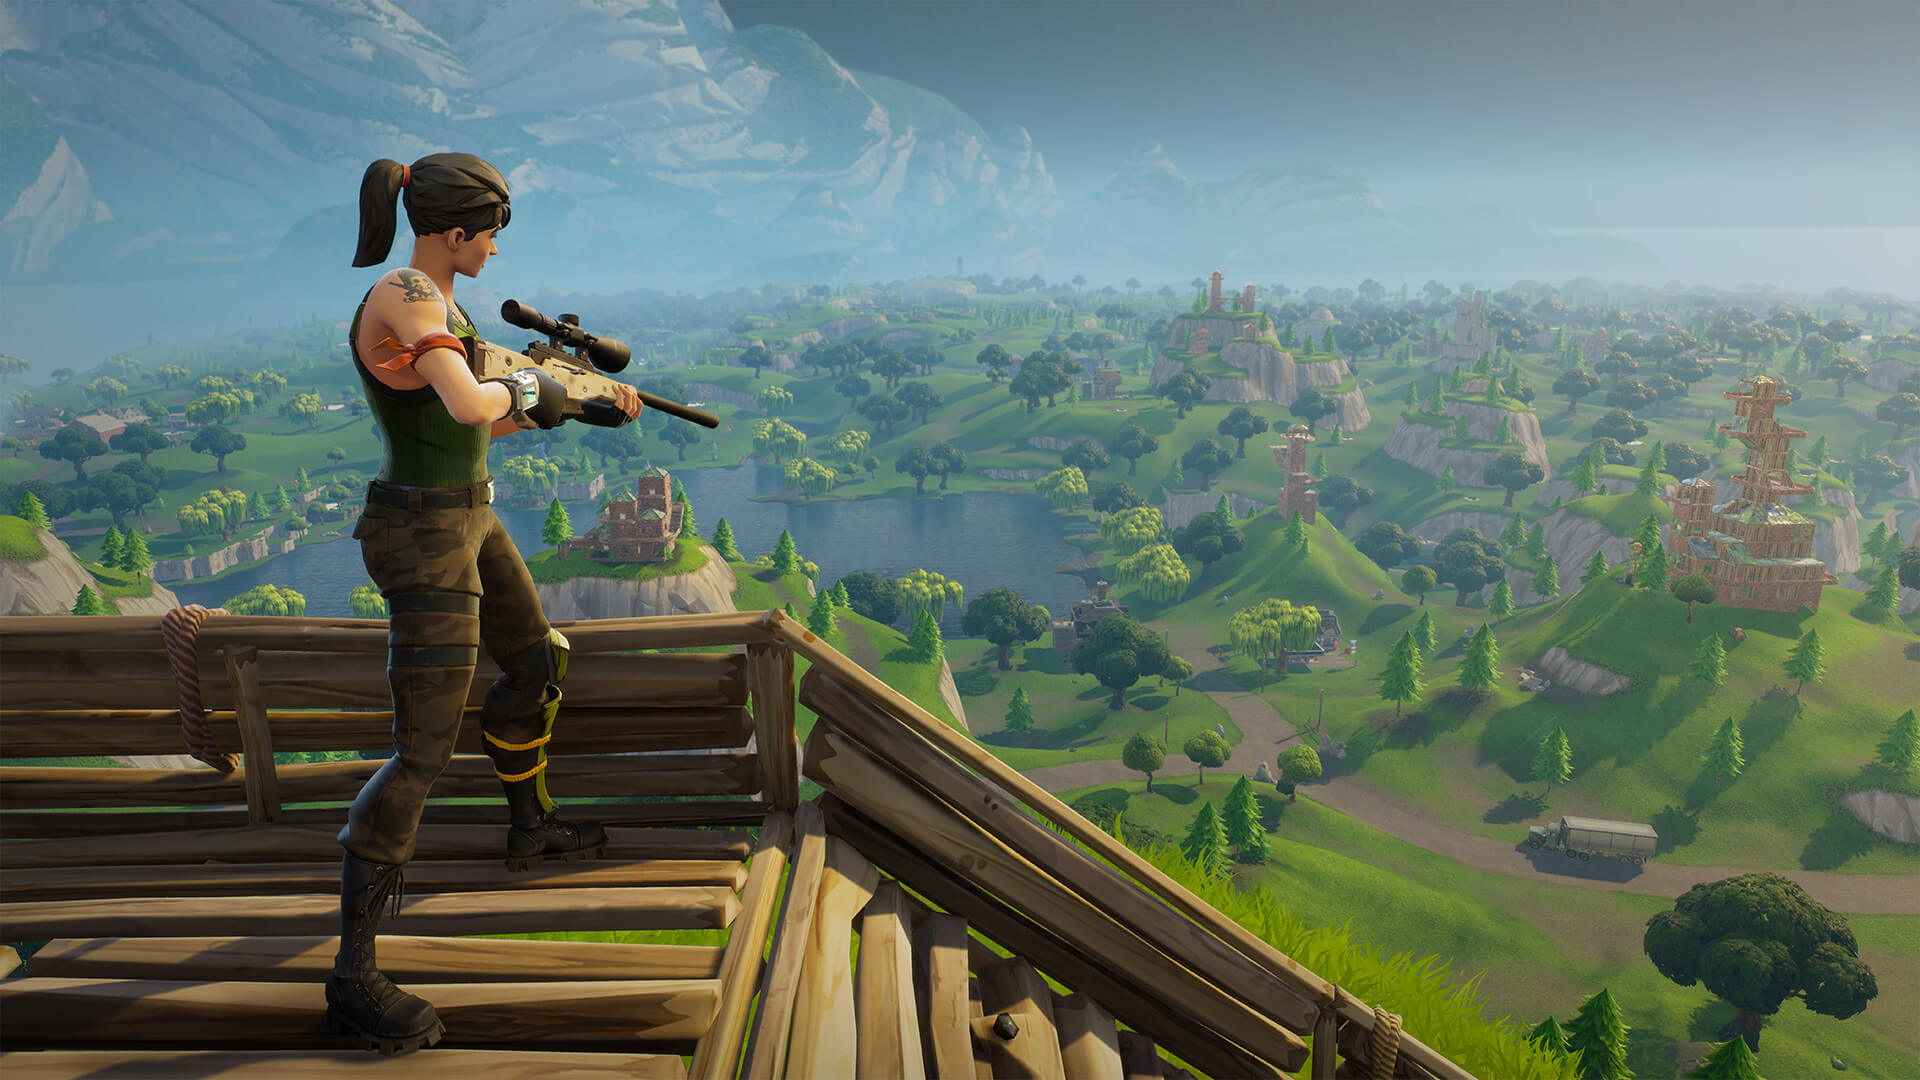 Epic Games' Fortnite is now available on Google Play store